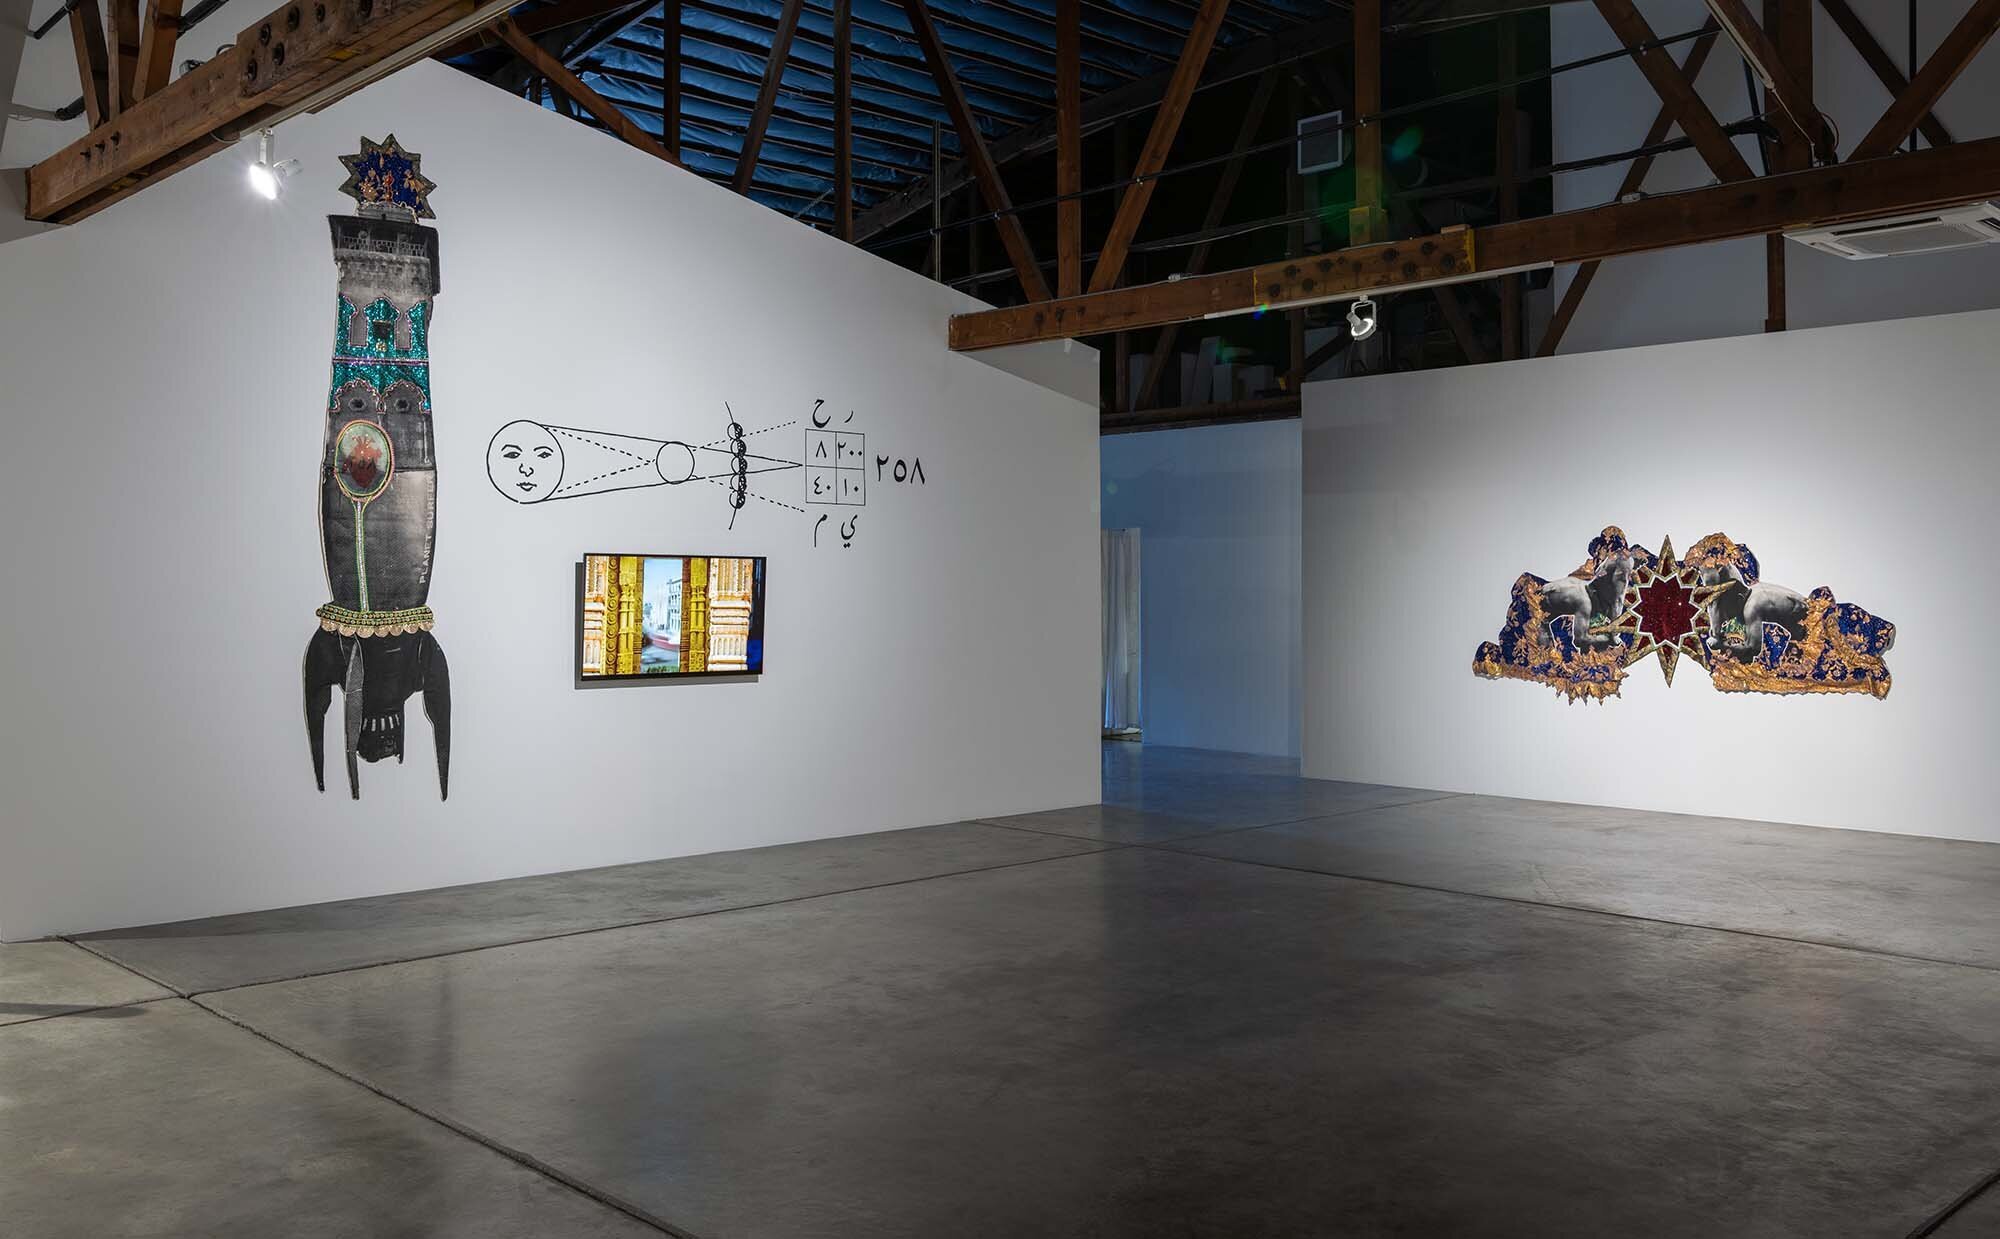   Ungodly,  2020 Disjecta Contemporary Art Center, Portland, Oregon, USA Group show curated by  Justin Hoover  